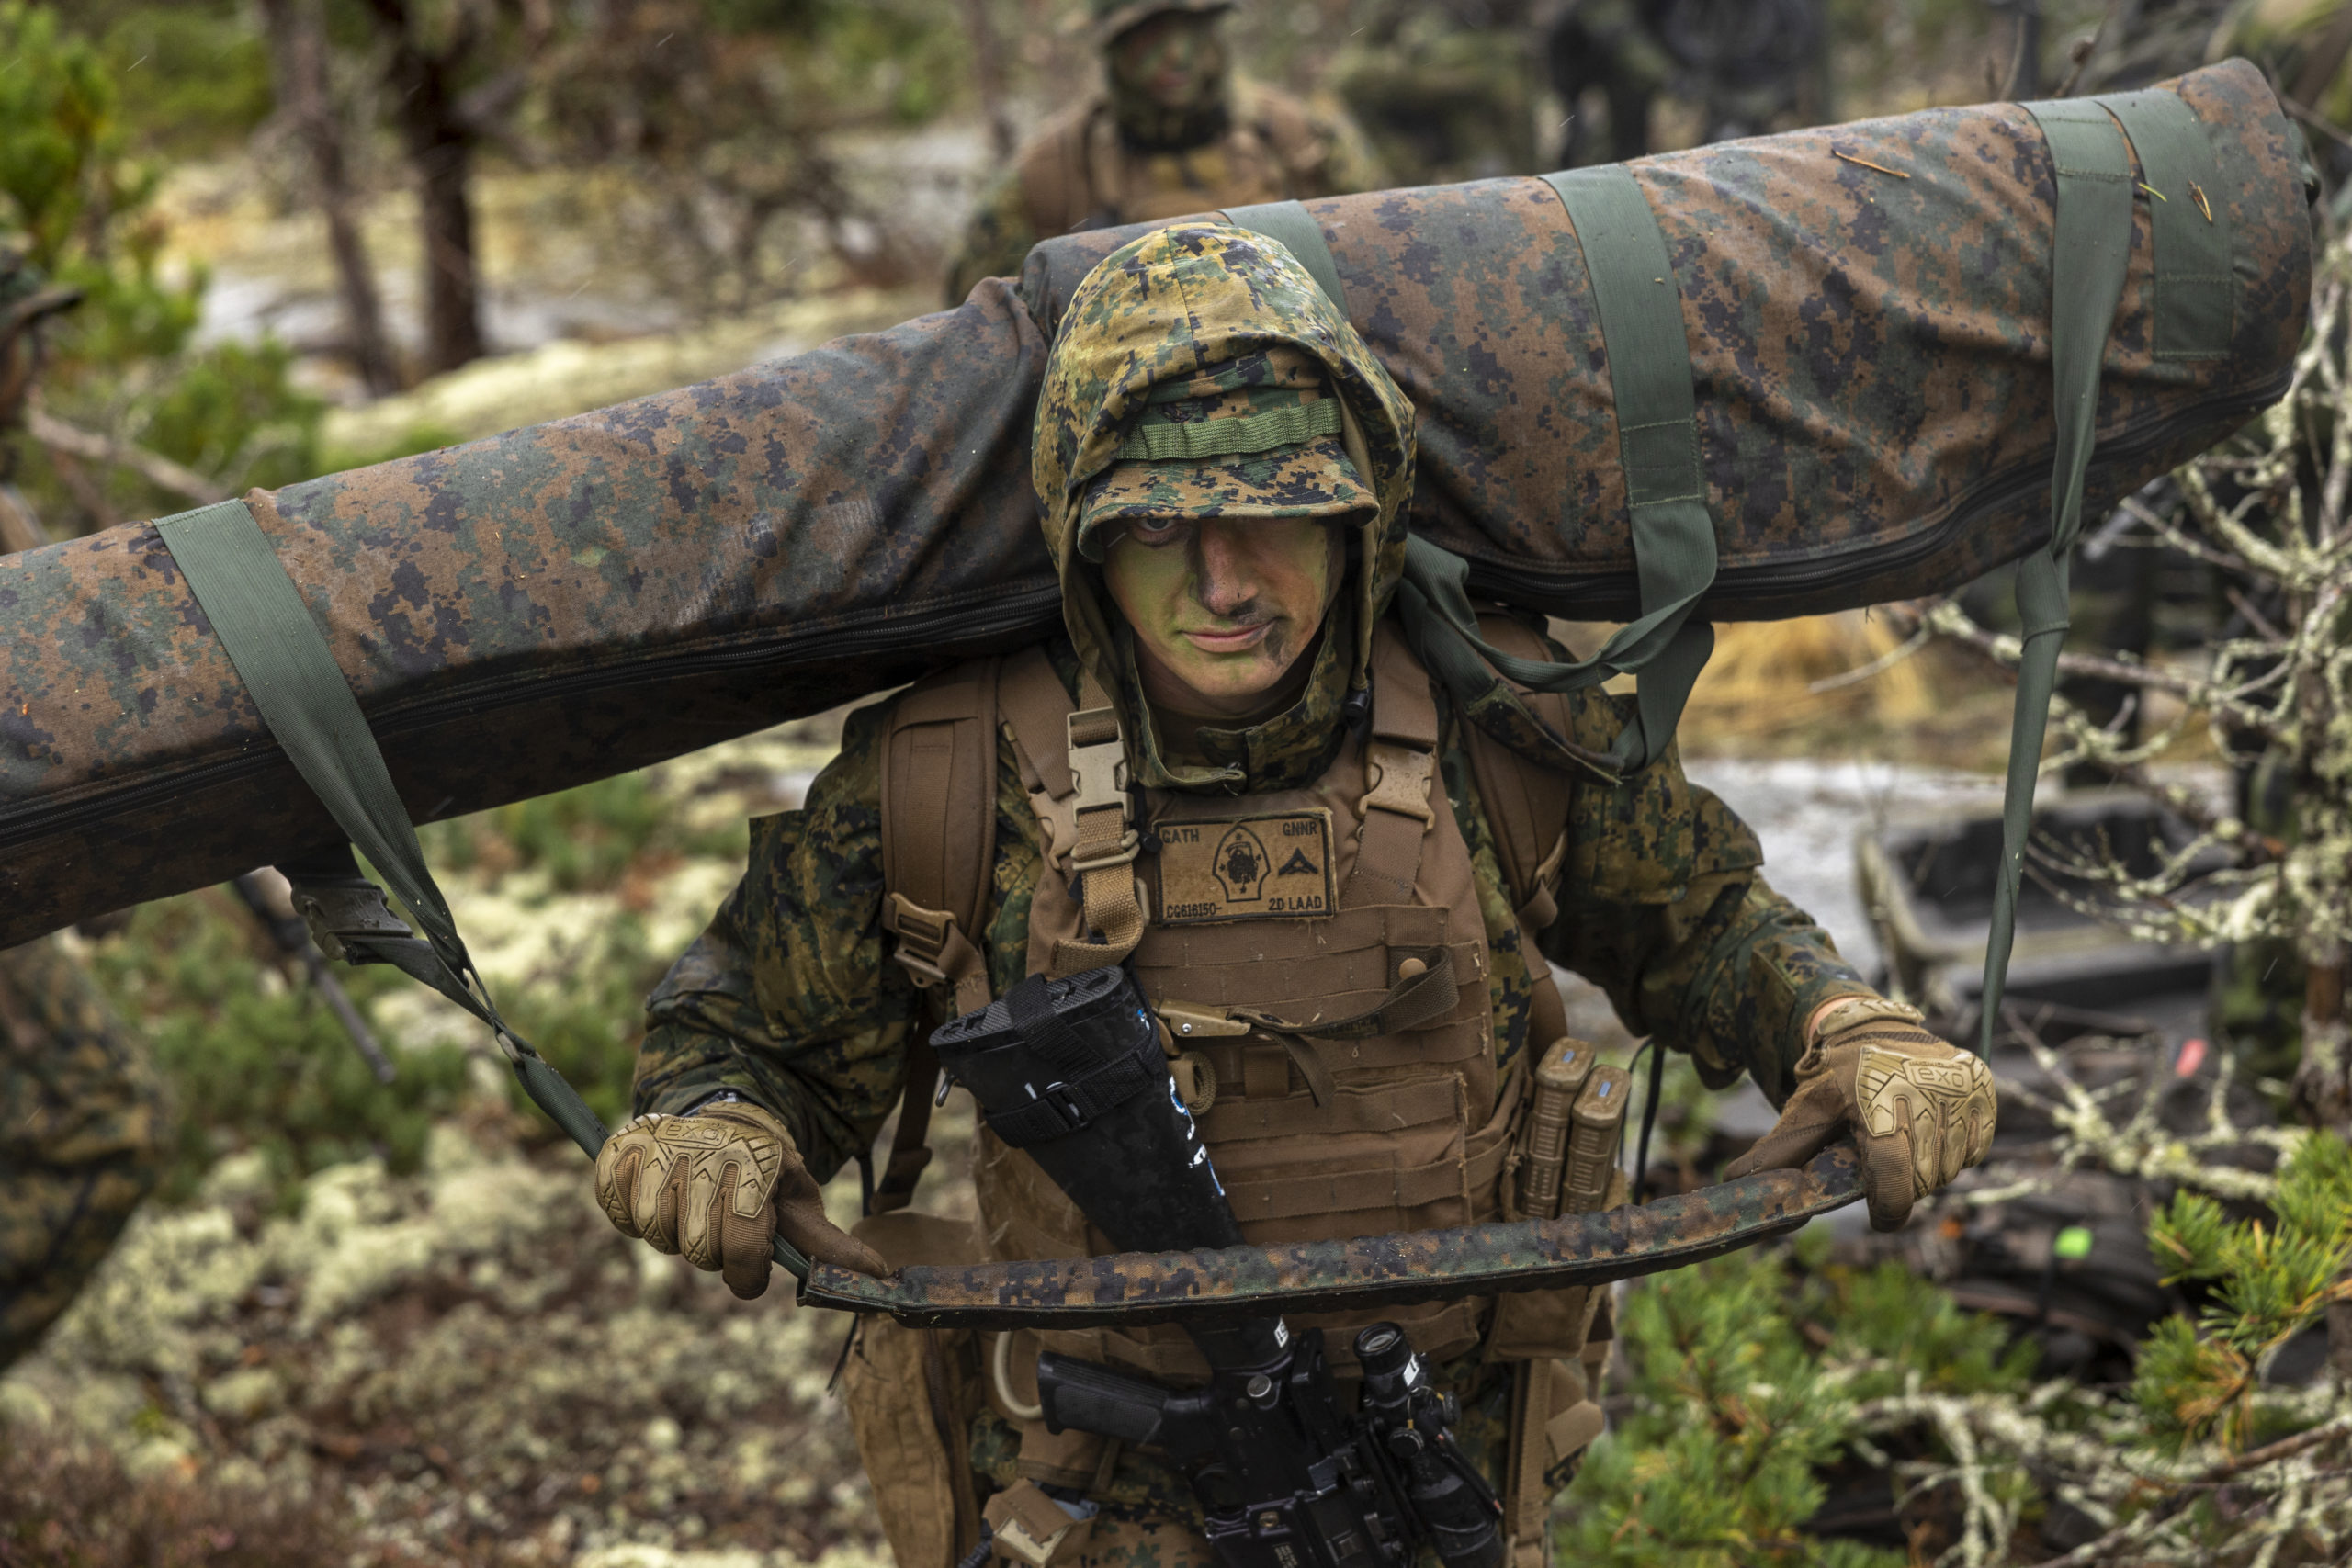 STORA SKOGSSKAR, SWEDEN - SEPTEMBER 13: A US Marine soldier during a military drill with the Swedish army and US marines on September 13, 2022 in Stora Skogsskar, Sweden. As part of Archipelago Endeavour military drill, the Swedish army and US marines join in this training for the fourth time.